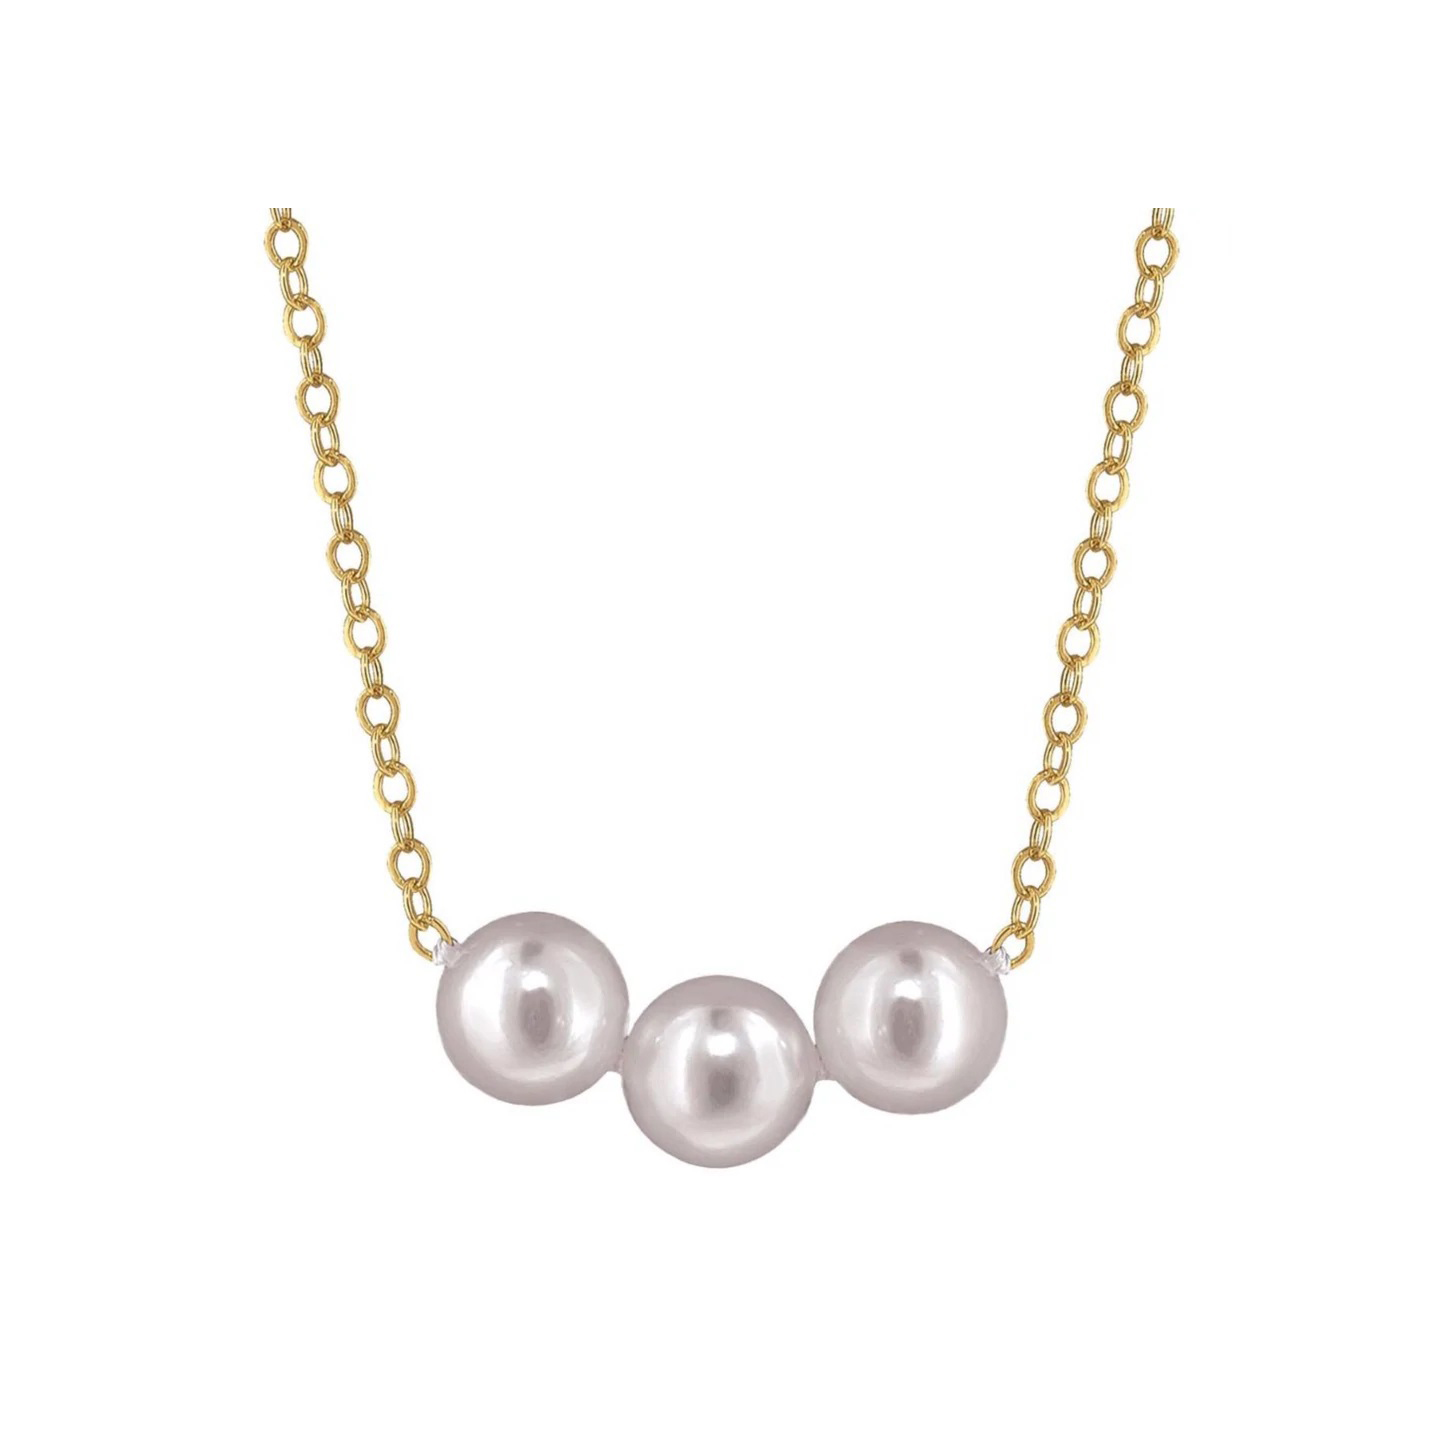 Add-a-Pearl 6mm 4 Pearls Starter Necklace — Shreve, Crump & Low, Pearls For  Jewelry Making - valleyresorts.co.uk